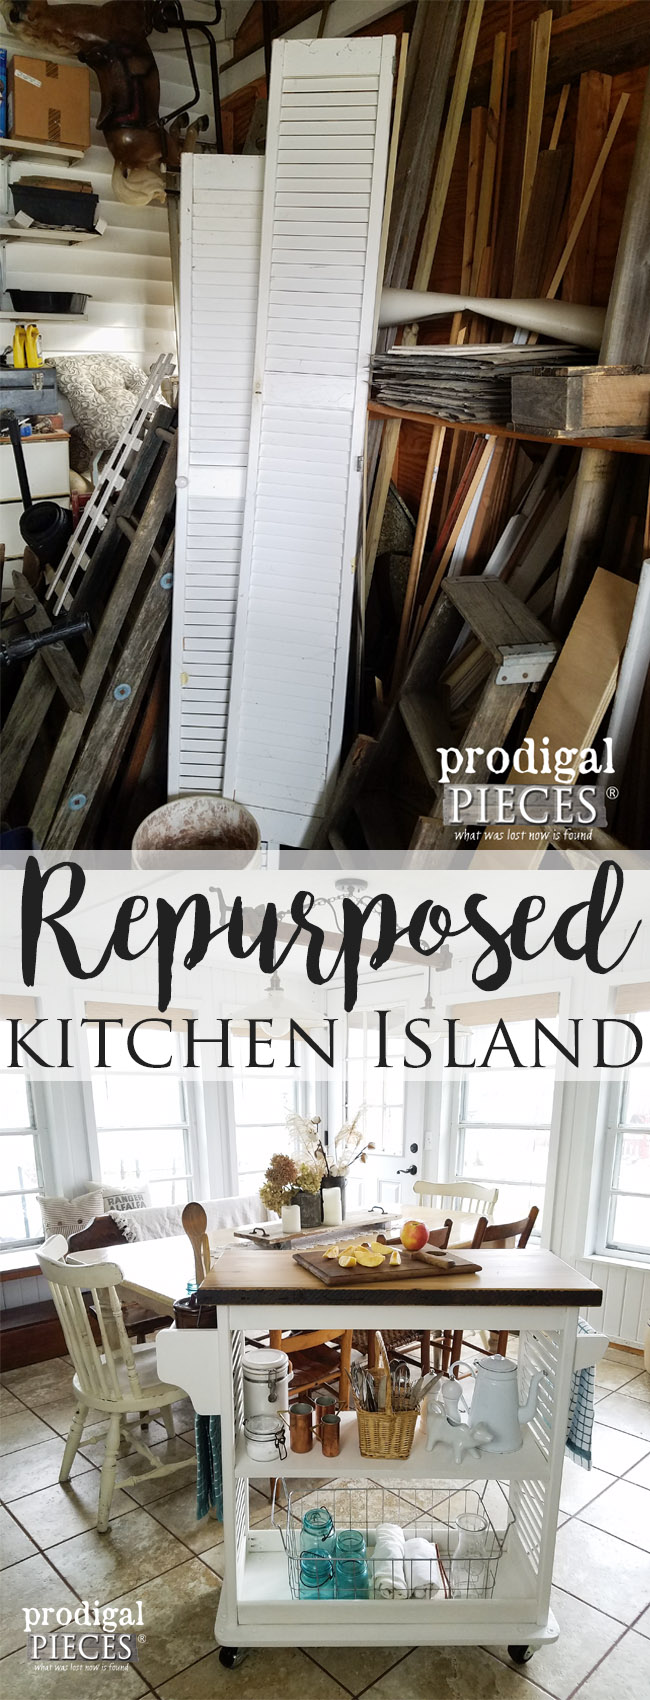 Check out this Repurposed Kitchen Island Cart all made from Repurposed Materials by Prodigal Pieces | prodigalpieces.com